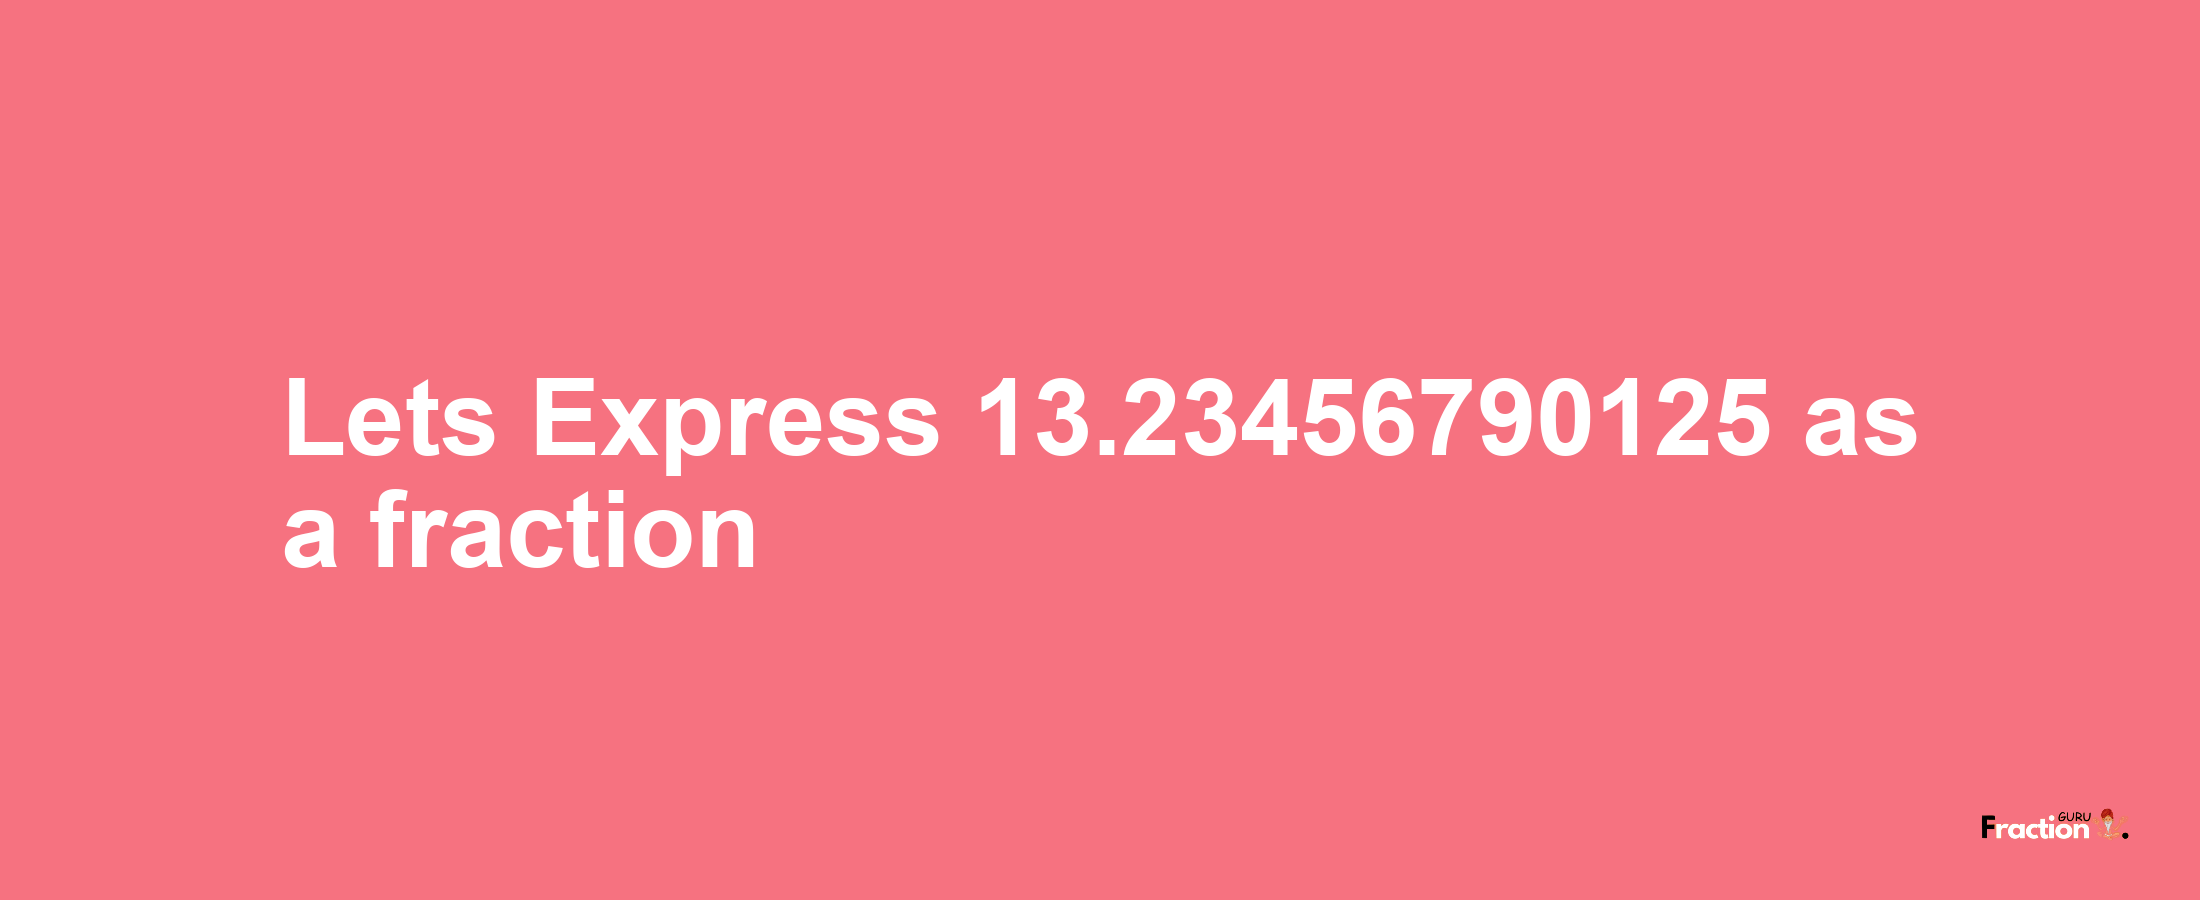 Lets Express 13.23456790125 as afraction